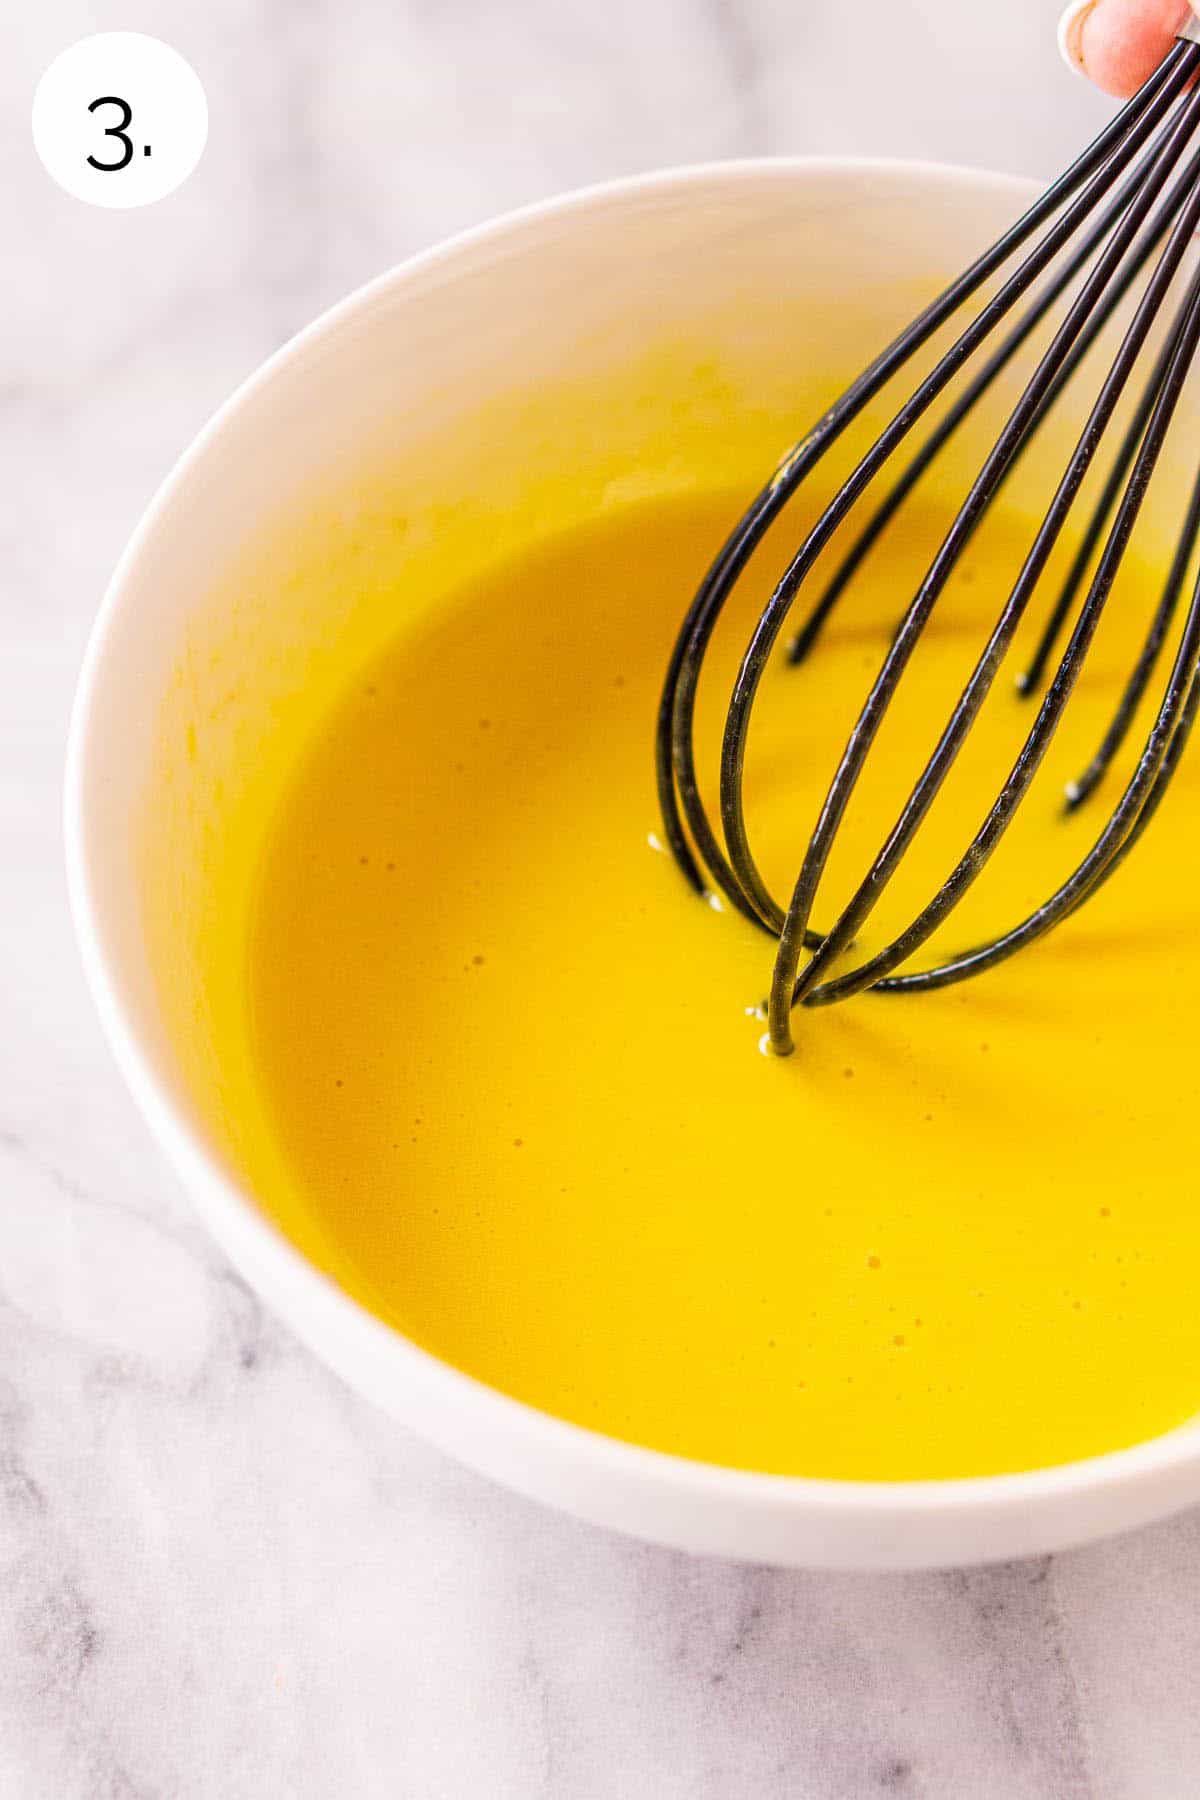 A small black whisking mixing together the egg yolks in a white bowl on a white and gray marble surface.